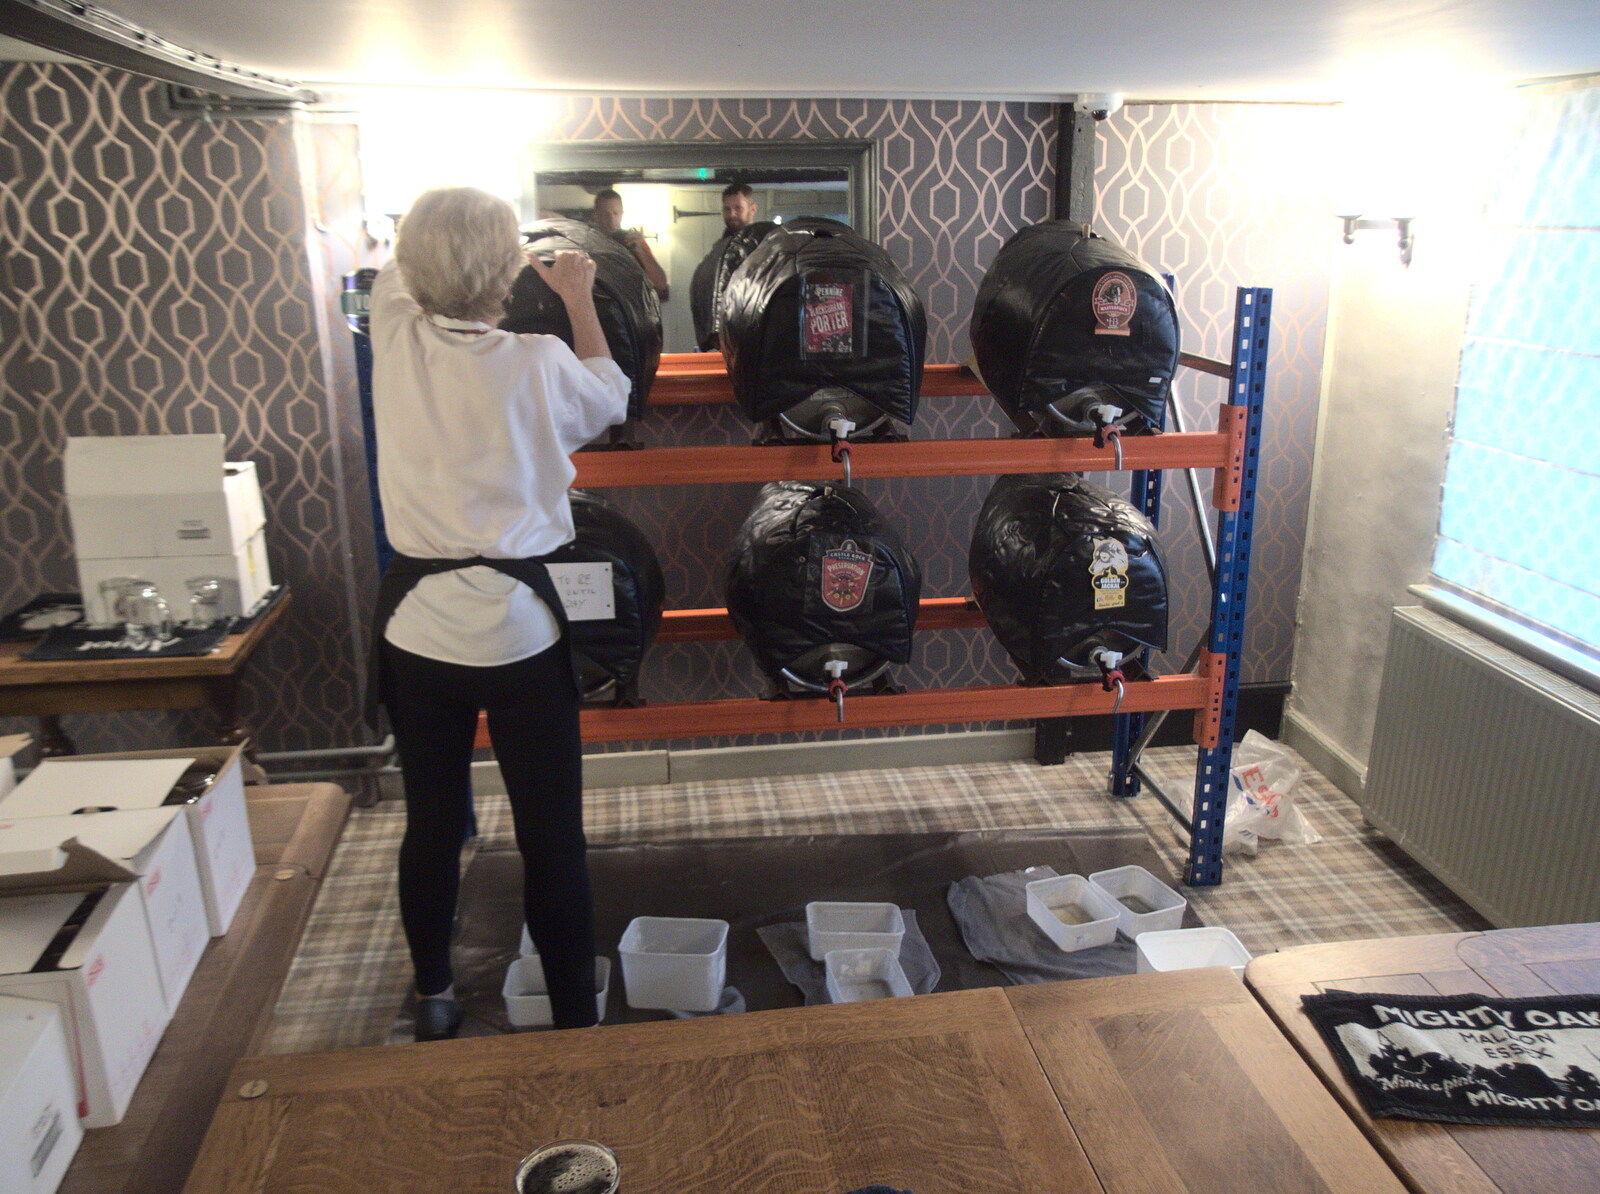 The BSCC at the Cross Keys, Redgrave, Suffolk - 25th August 2022: Six barrels of beer at the Redgrave Cross Keys